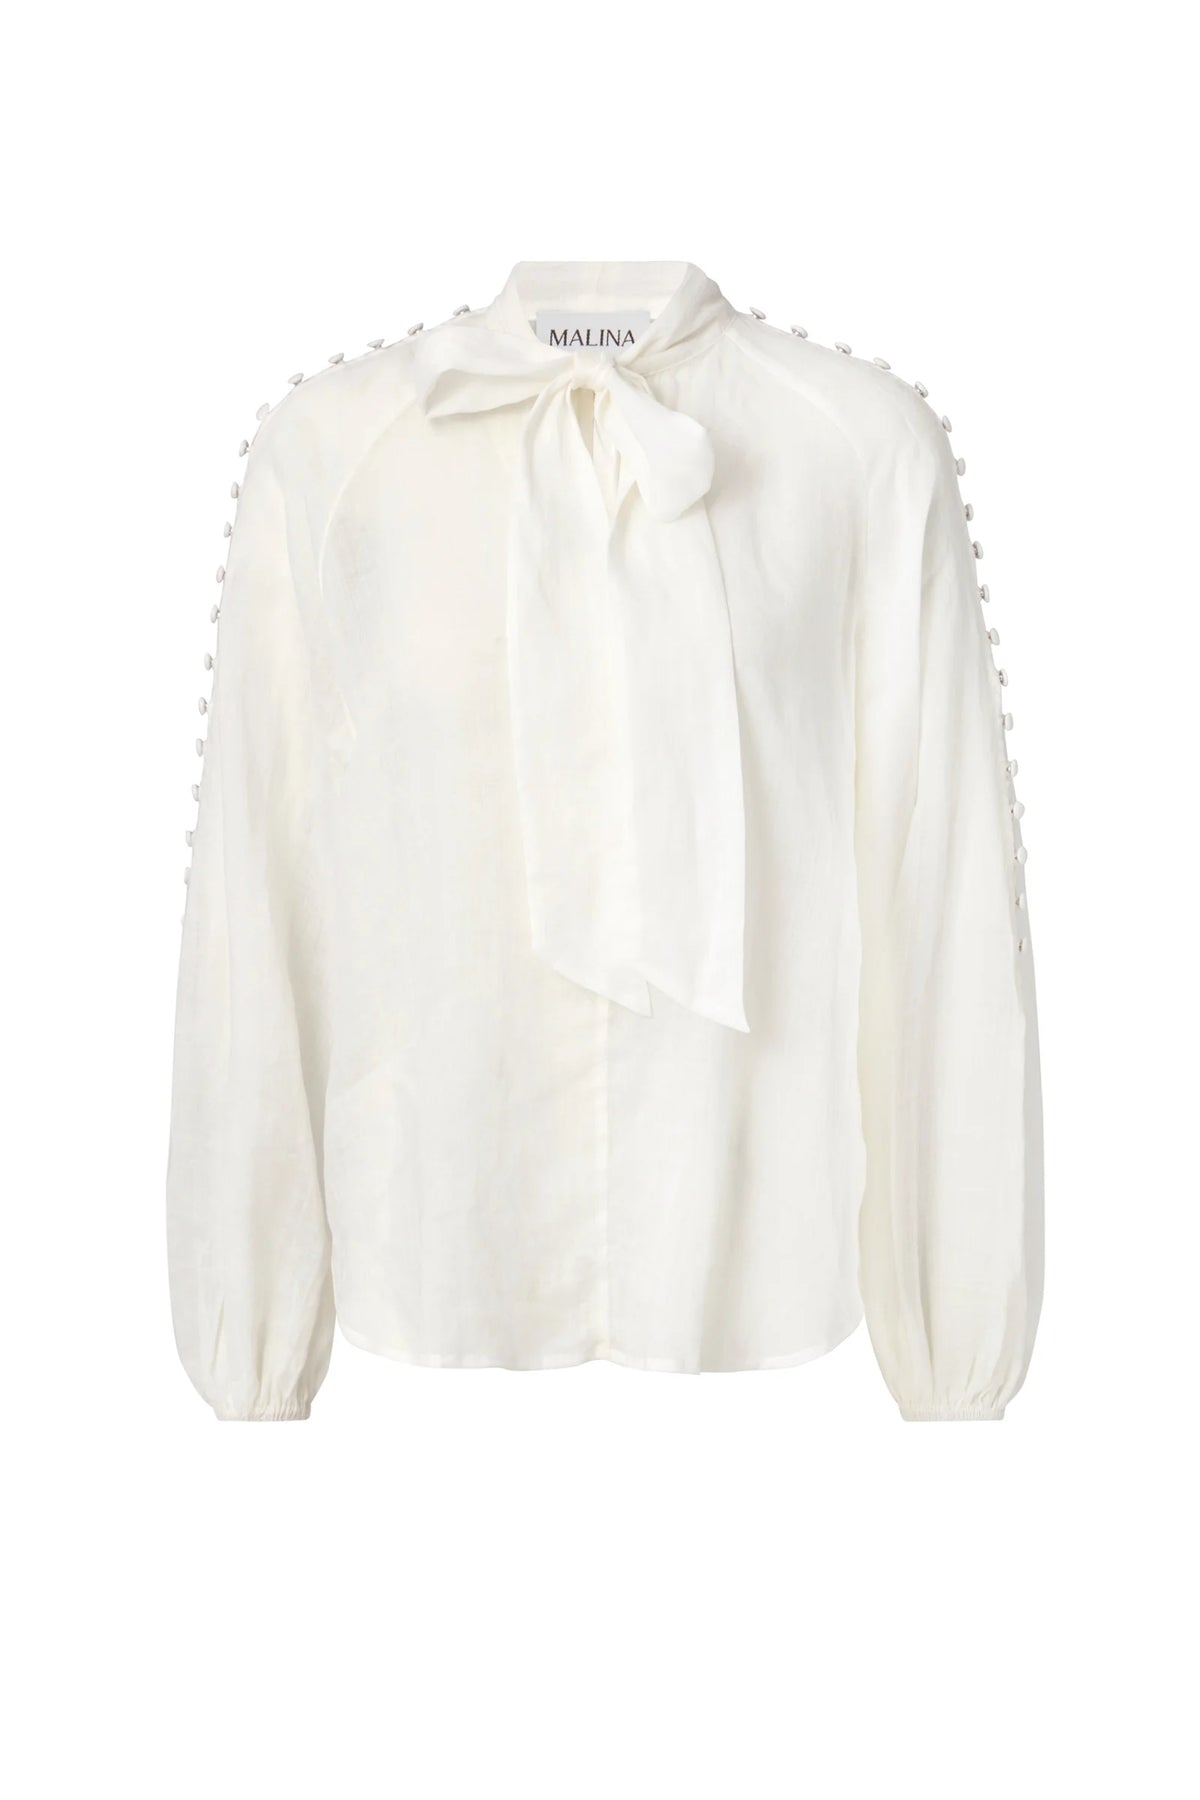 white long sleeved shirt with bow neck and covered buttons down the raglan sleeves